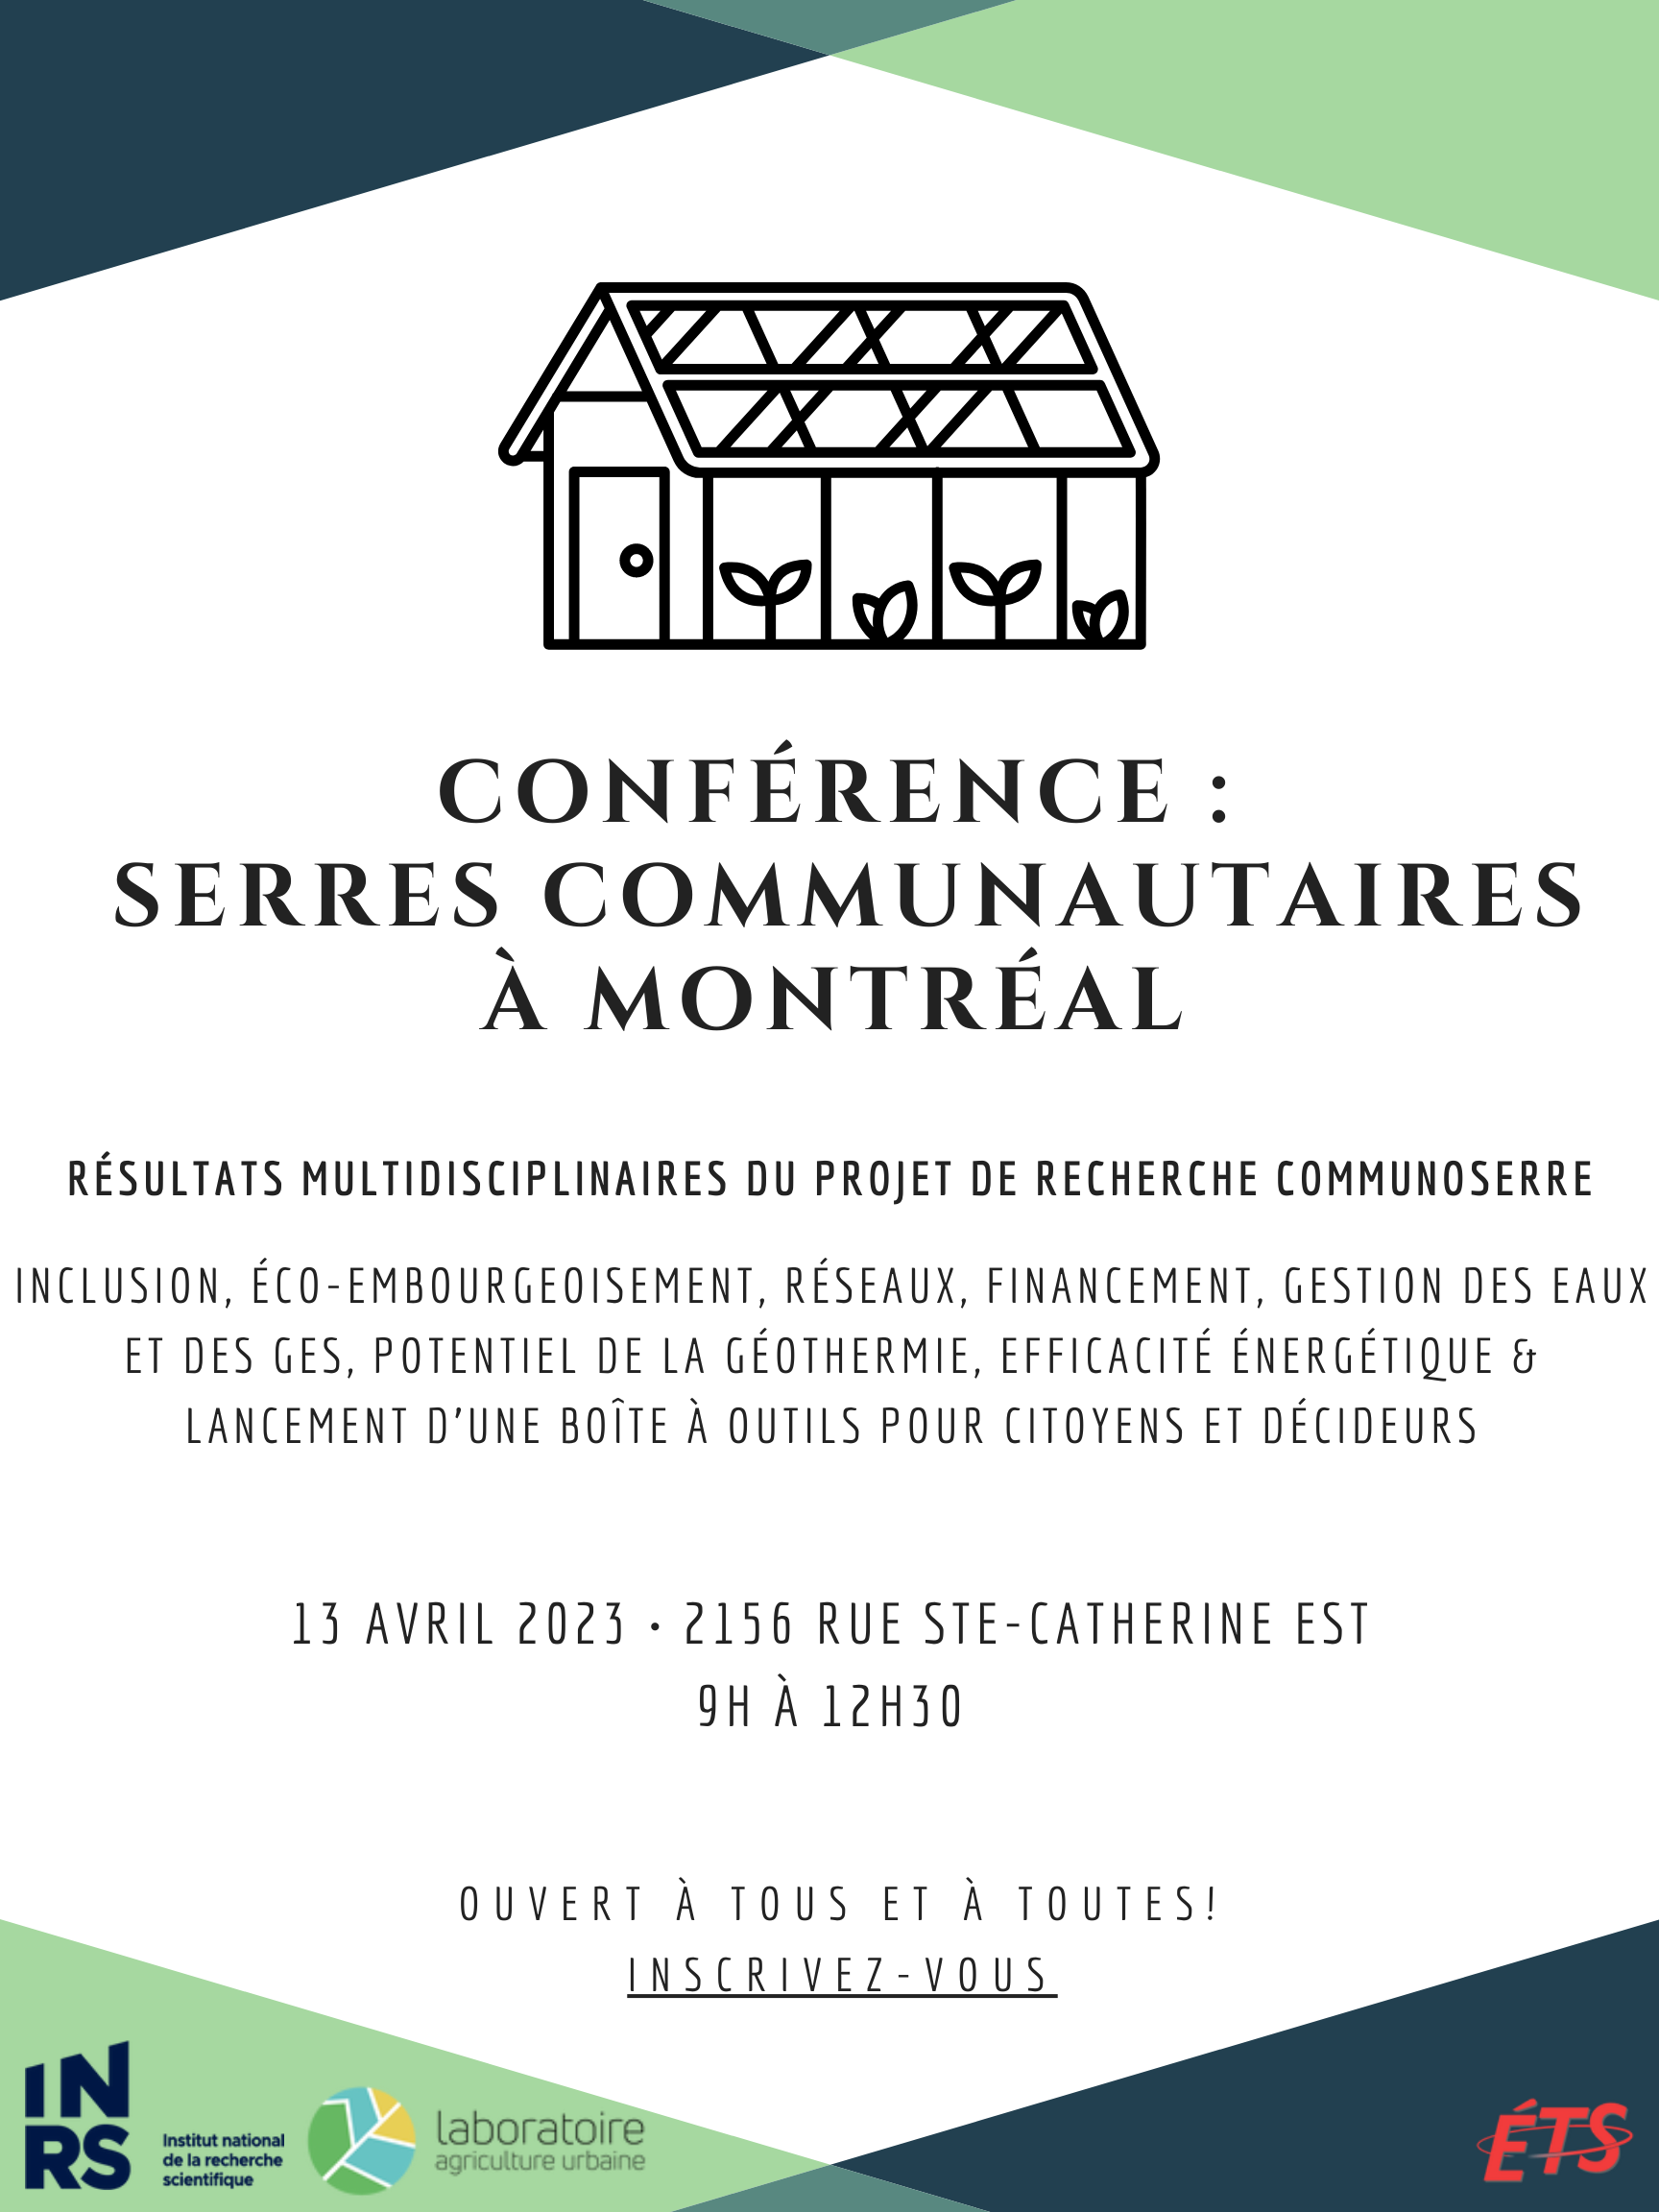 Conference: Community greenhouses in Montreal